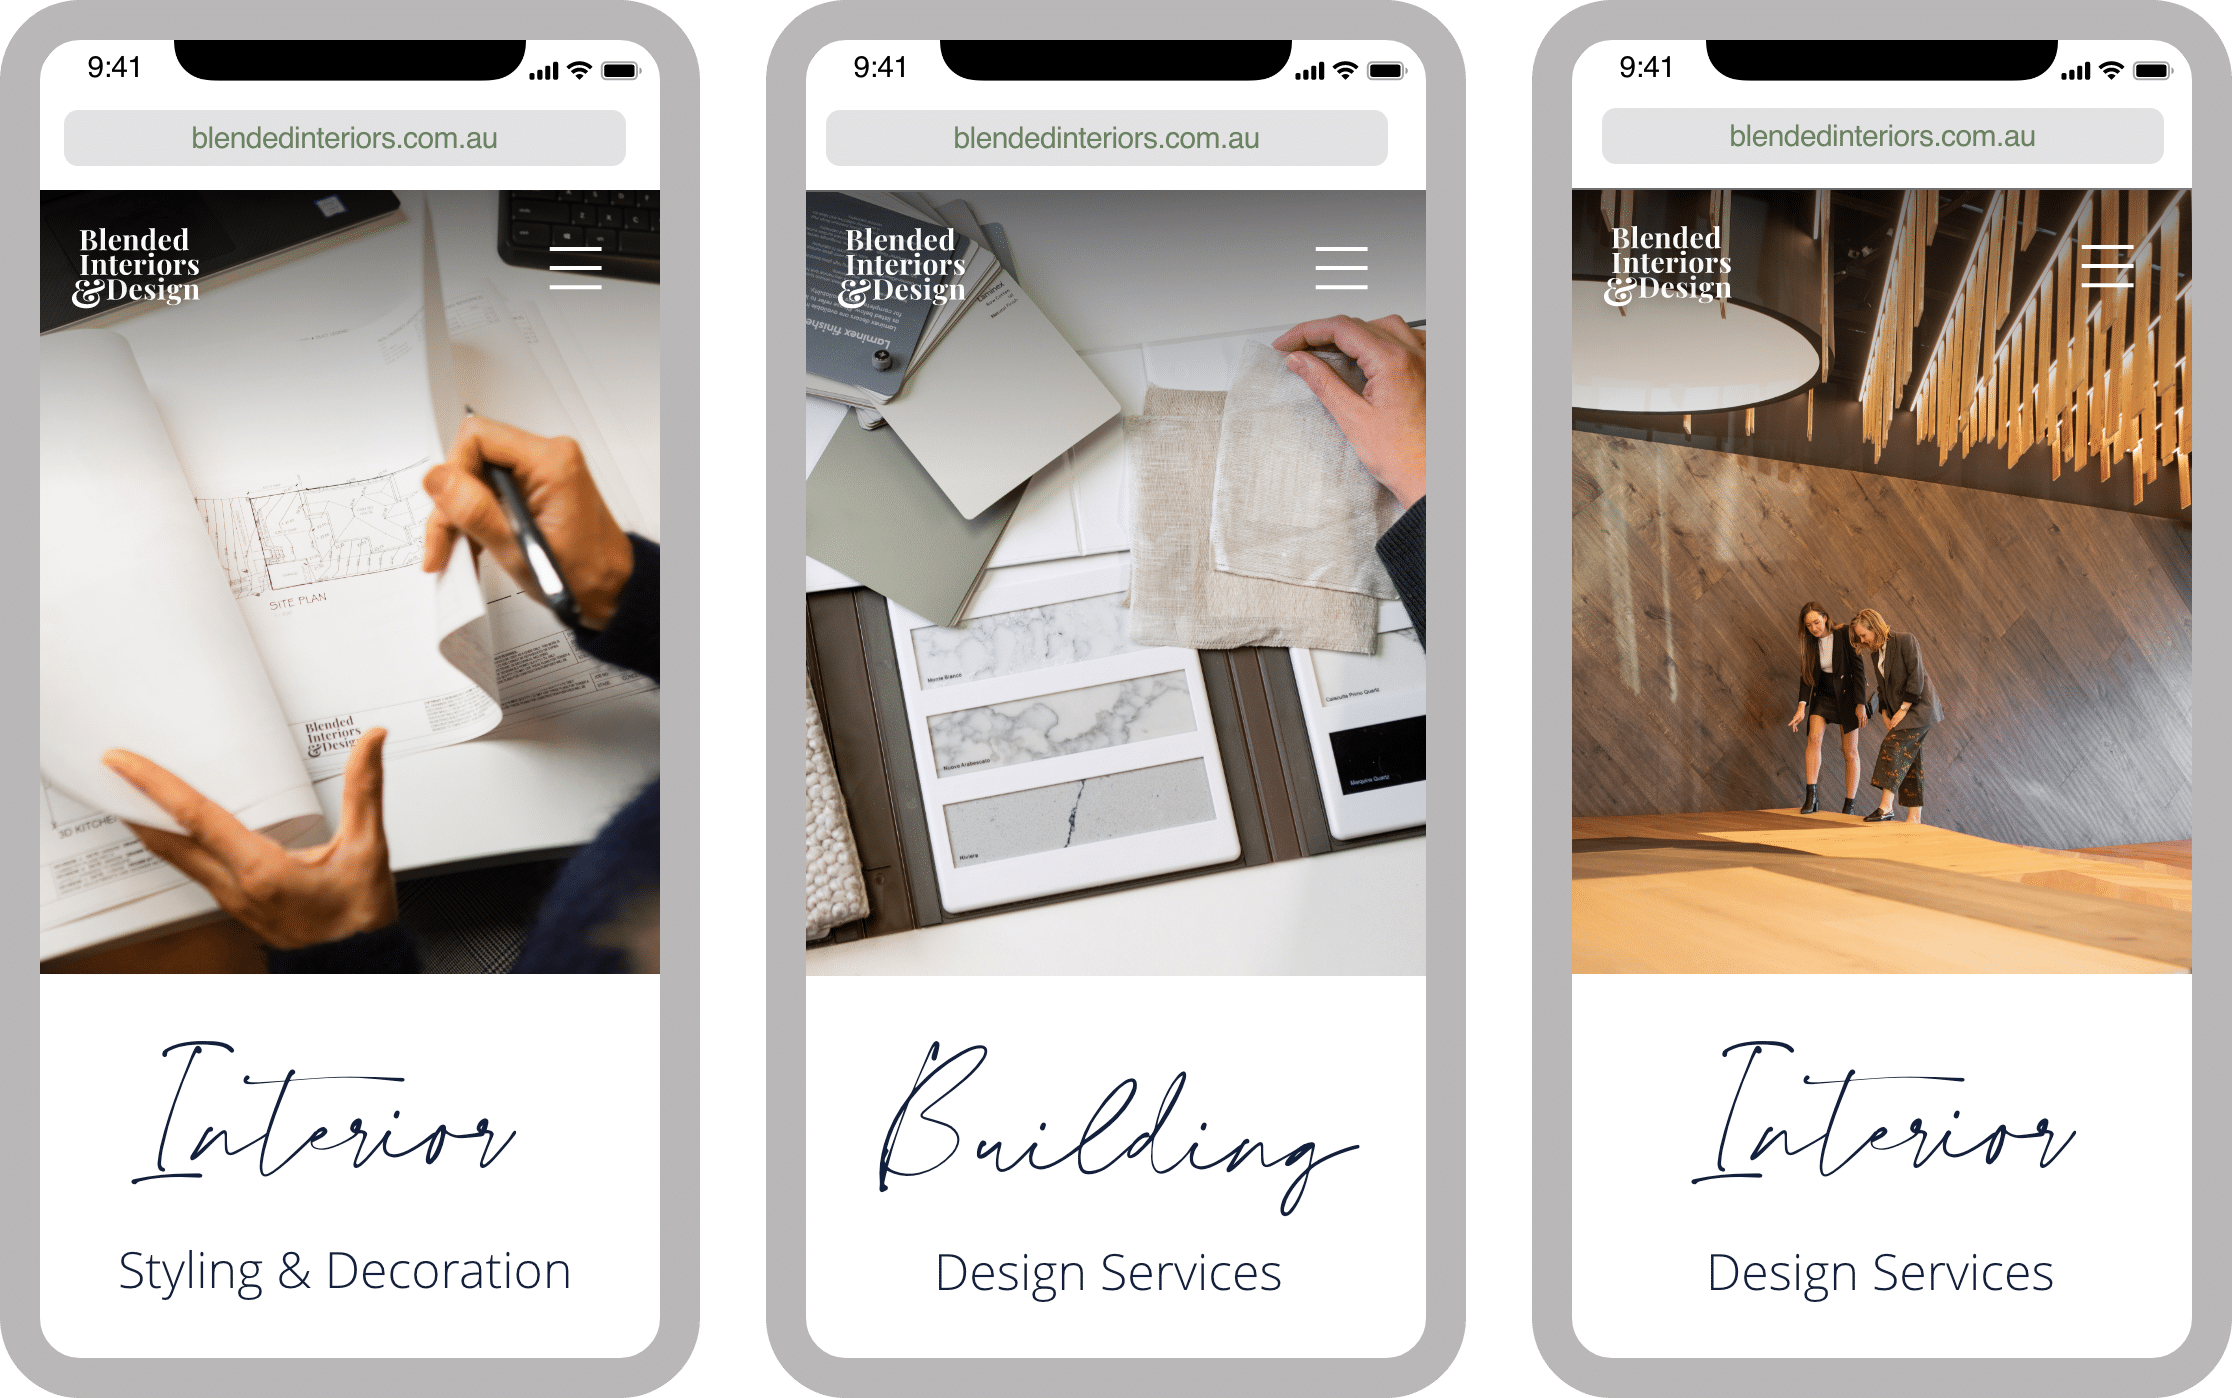 iPhone mockups featuring the Blended Interiors & Design website